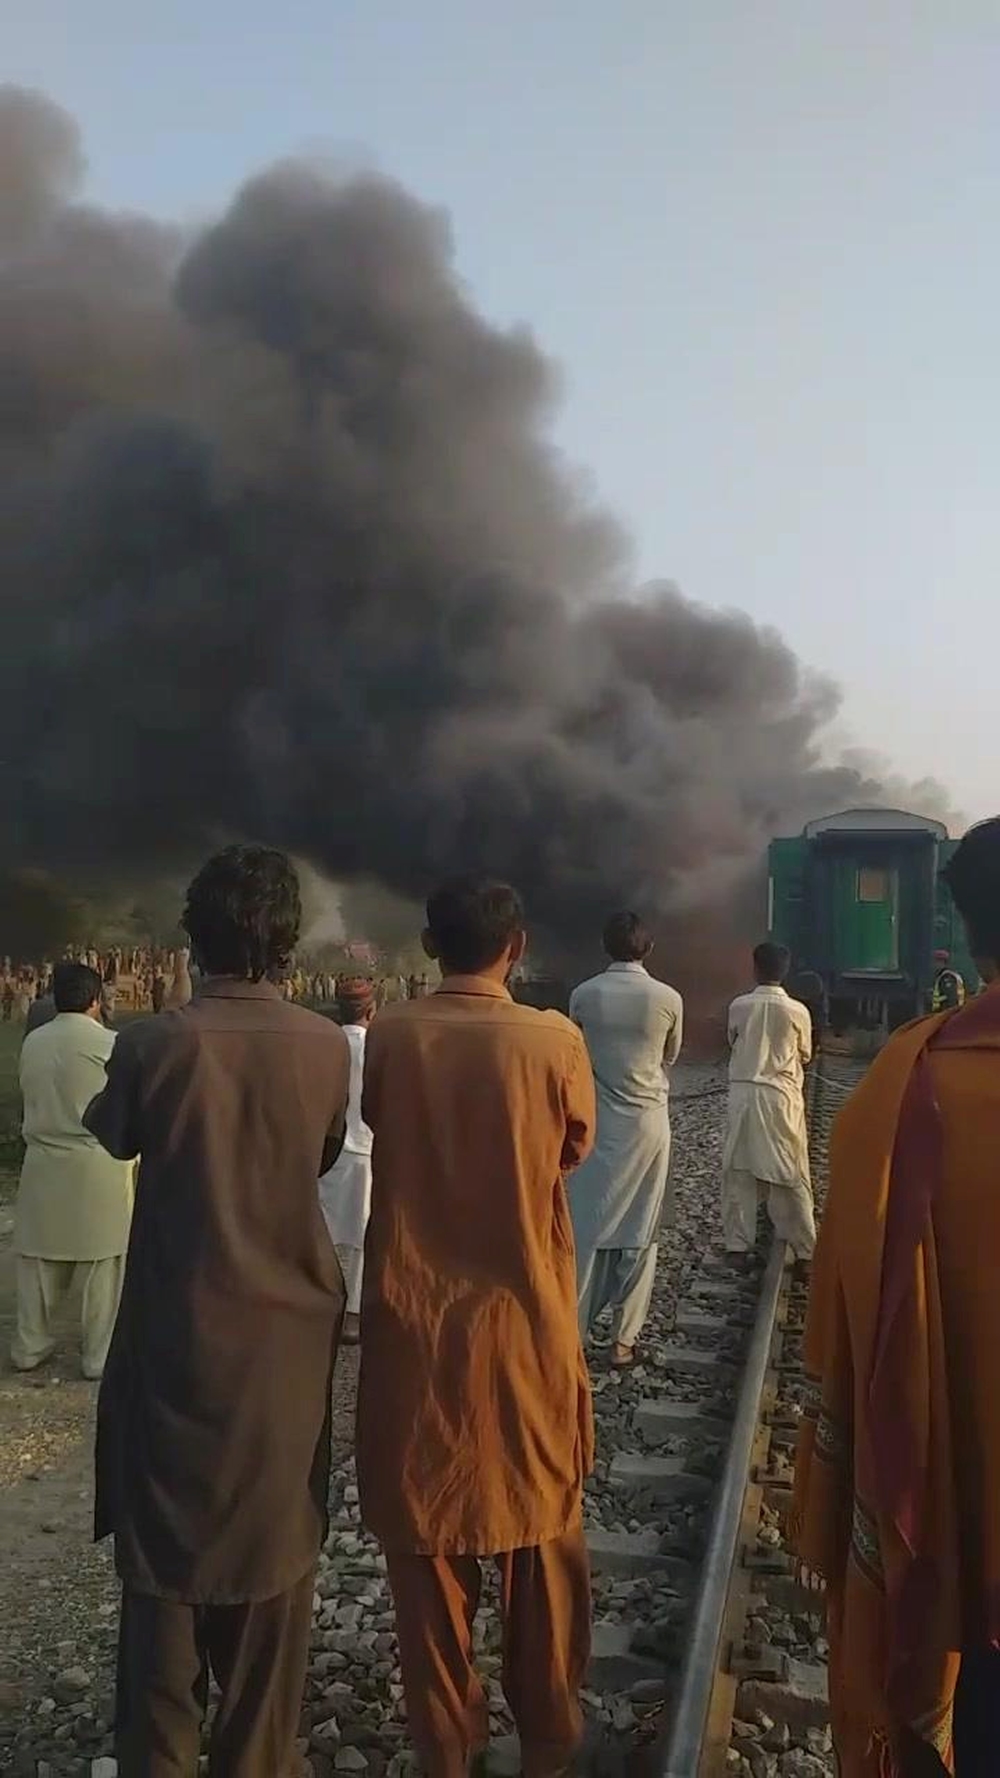 Men look at a burning train after a gas canister passengers were using to cook breakfast exploded, near the town of Rahim Yar Khan  / JAWEDASRAR SIDDIQUI